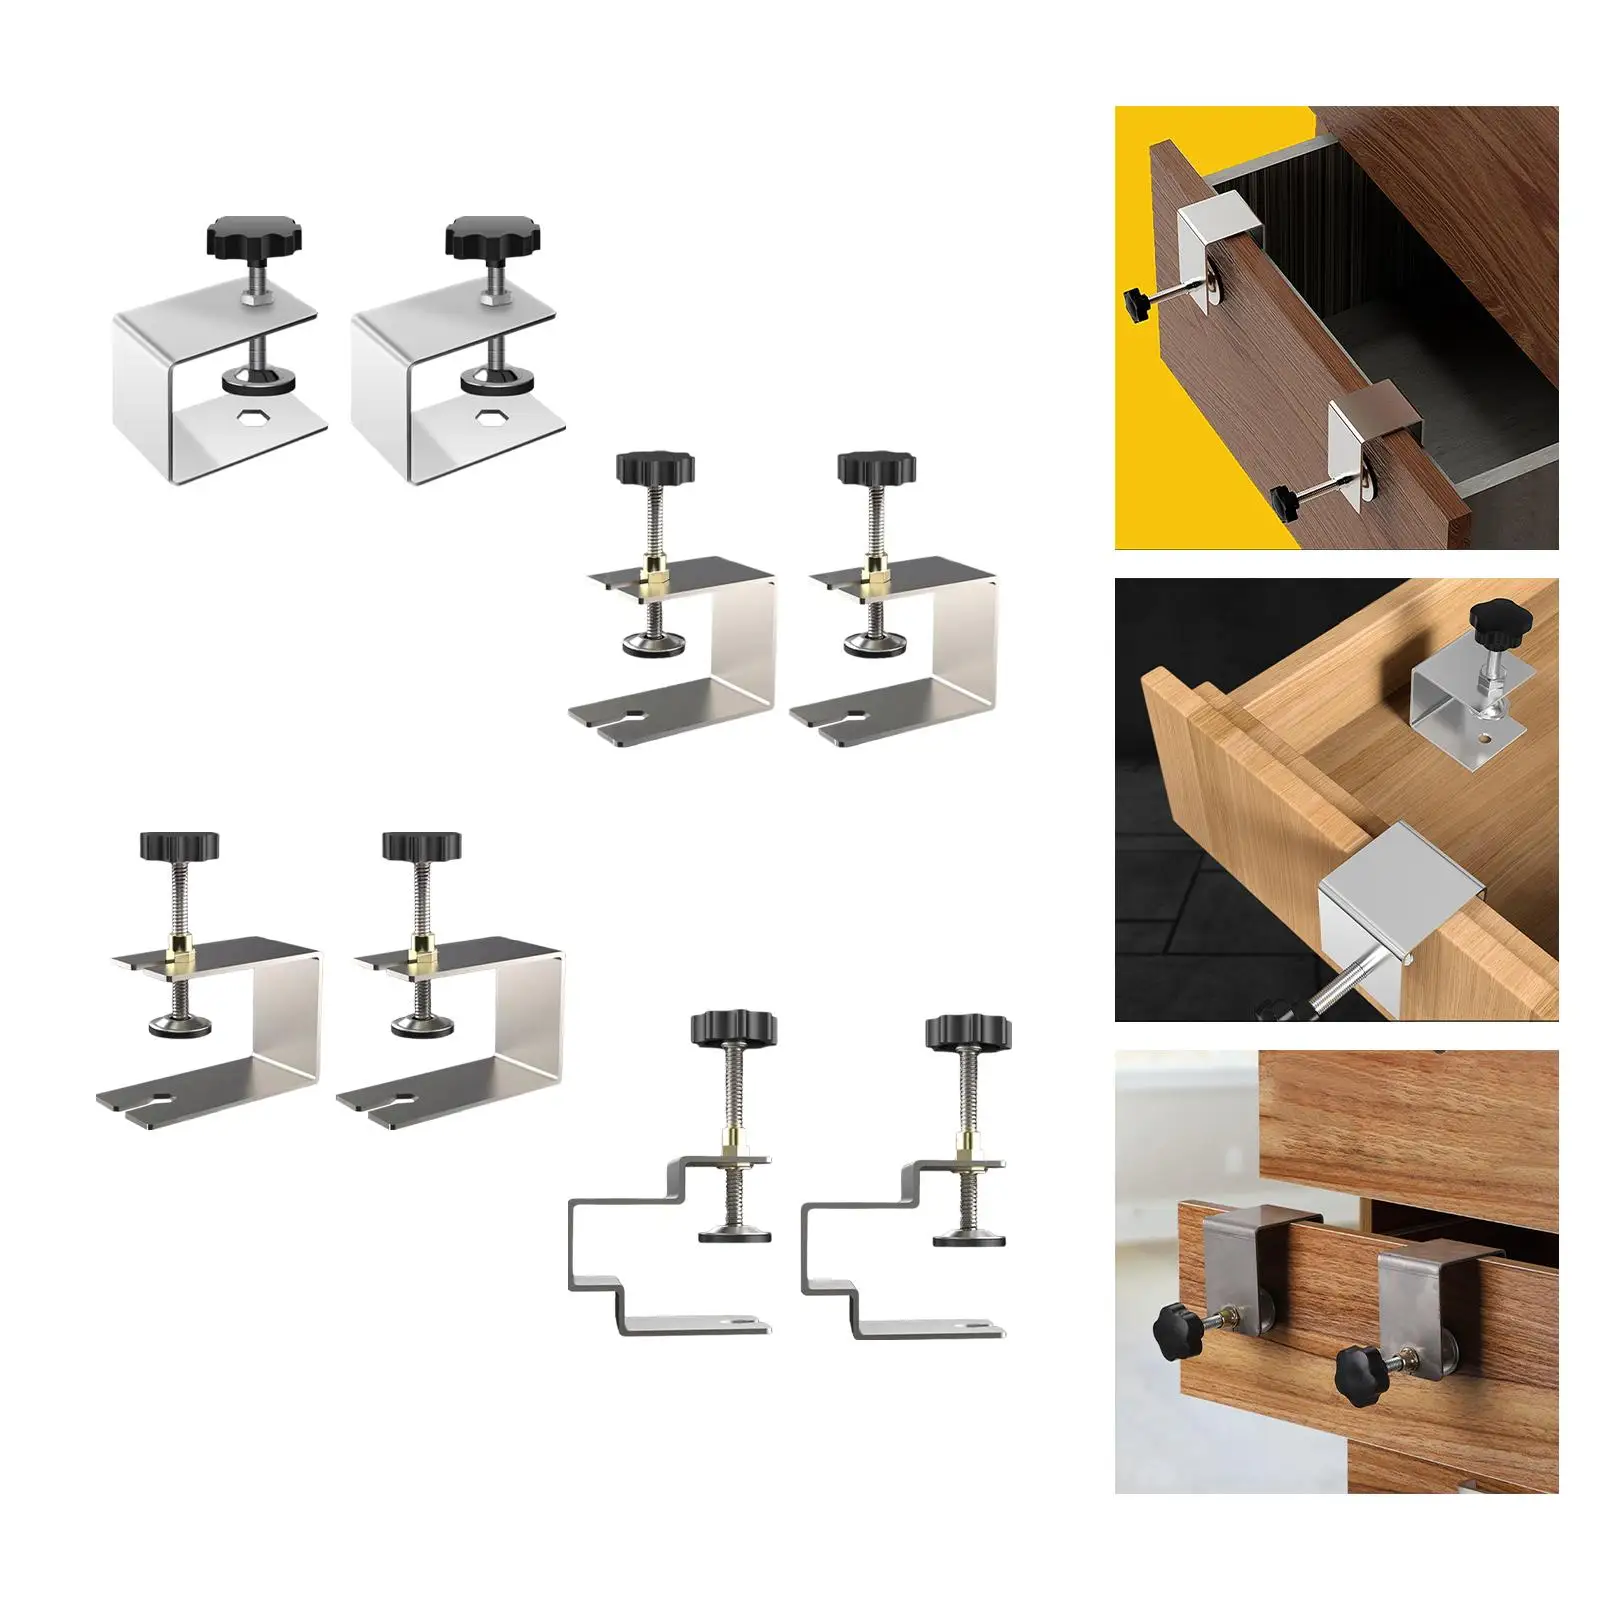 2pcs Stainless Steel Drawer Front Clamps Versatile Easy Adjustment Tool Fixture Hardware for Woodworking Carpenter Furniture